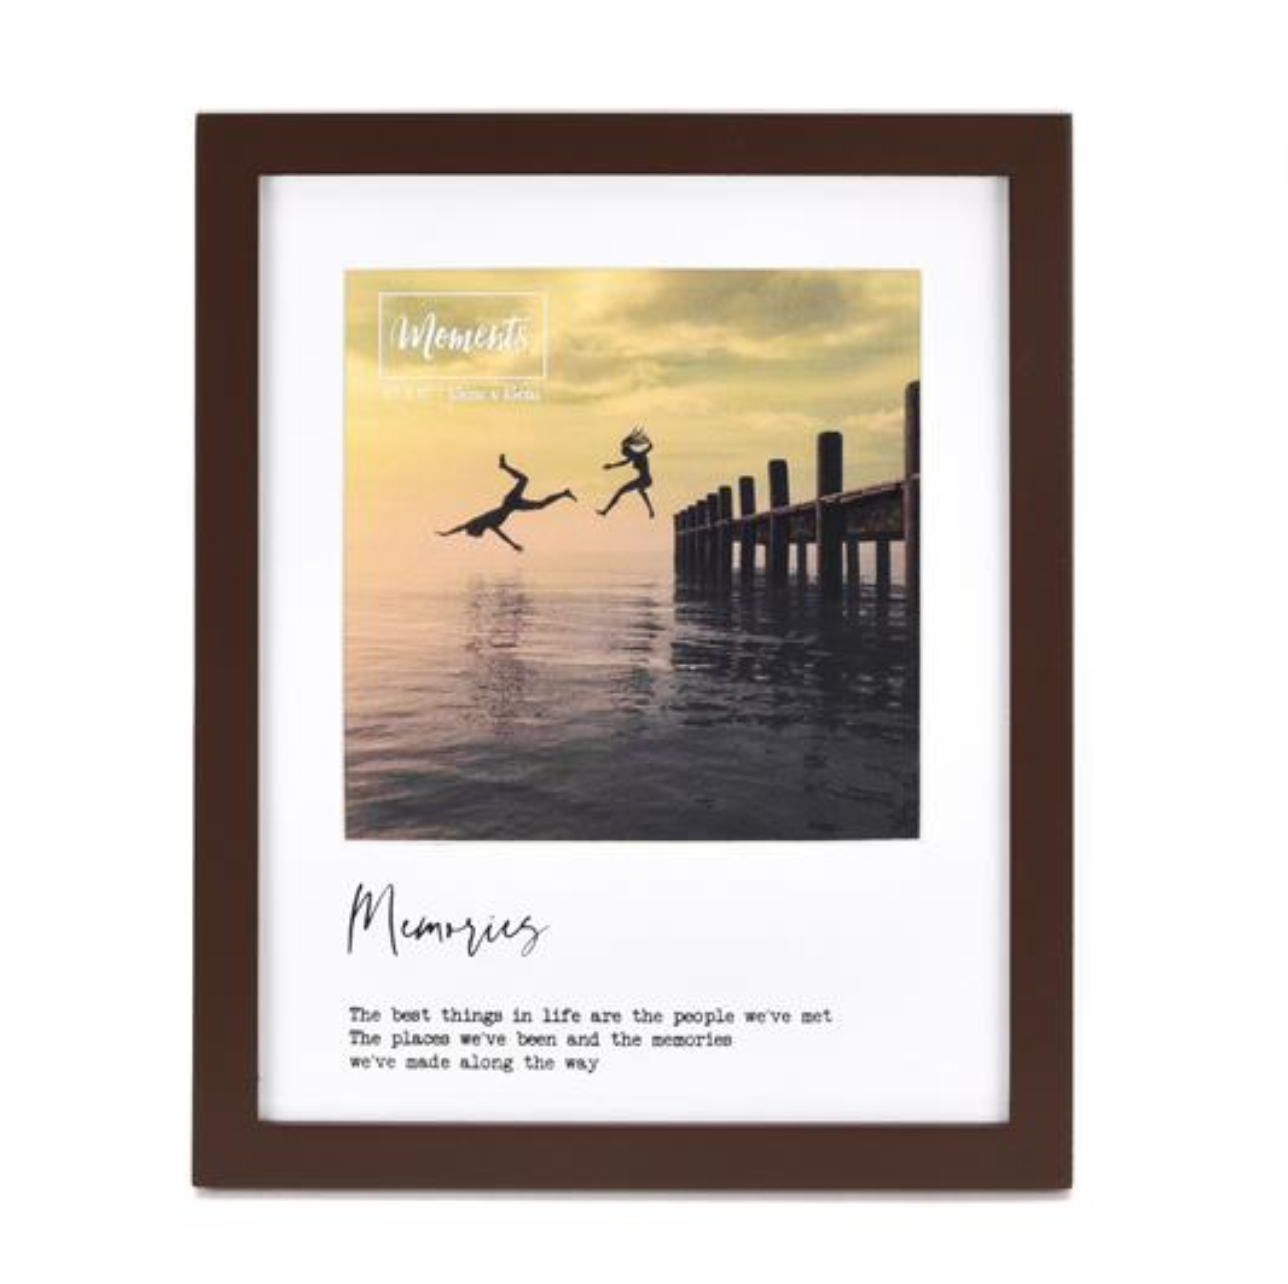 MOMENTS WOODEN PHOTO FRAME WITH MOUNT 6" X 6" - MEMORIES